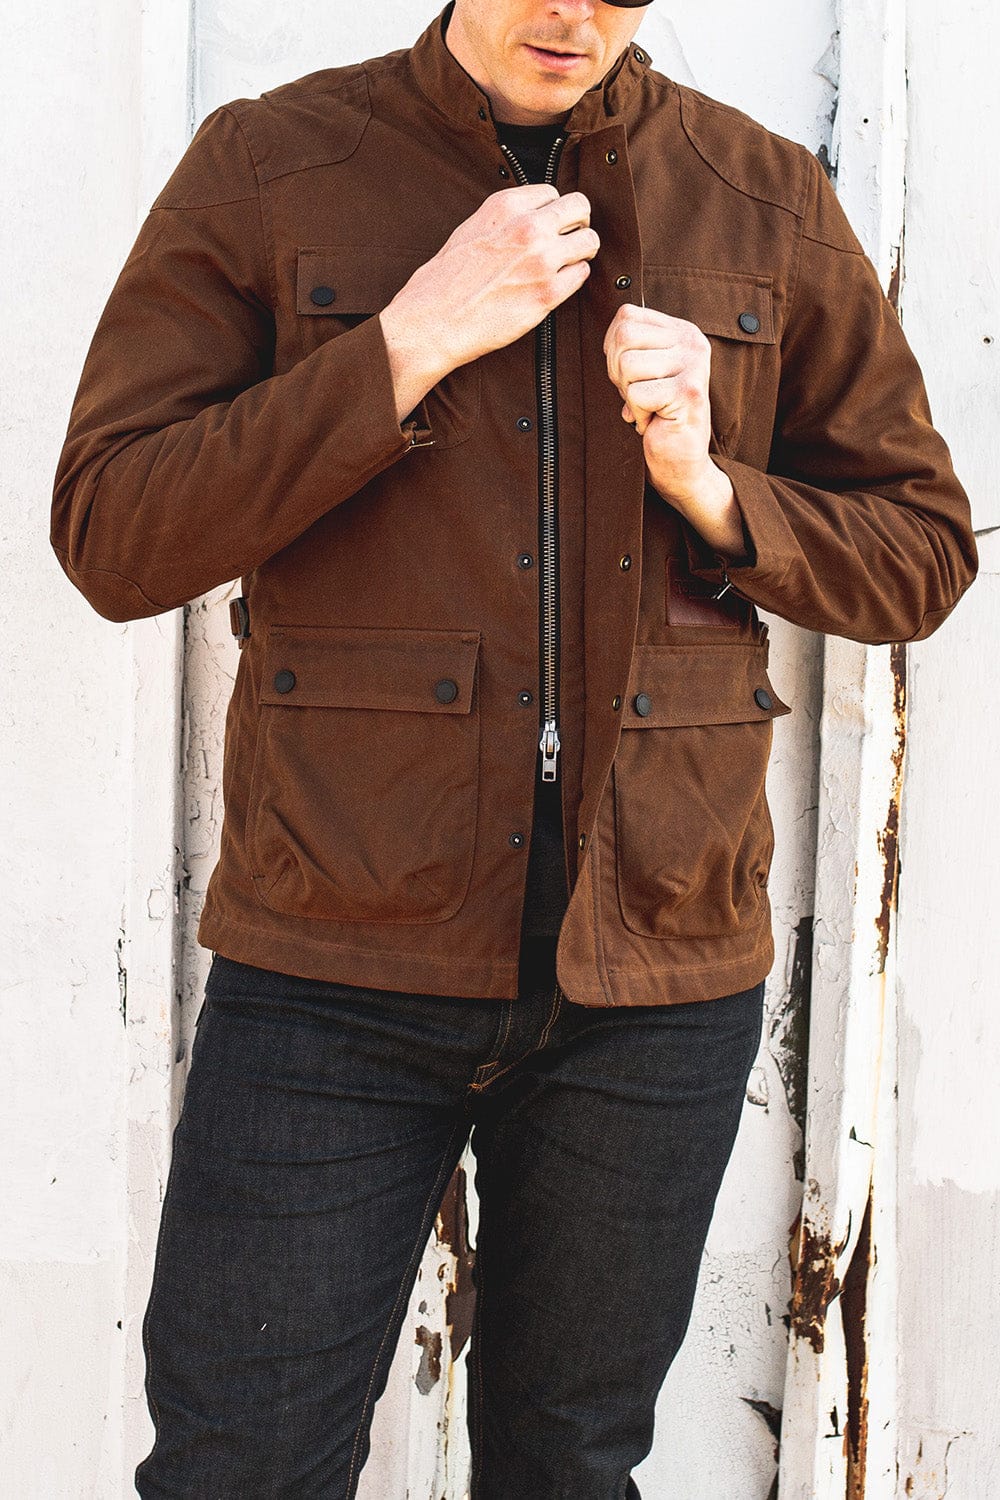 The McCoy Waxed Canvas Protective Jacket - Brown. Pockets for D3O